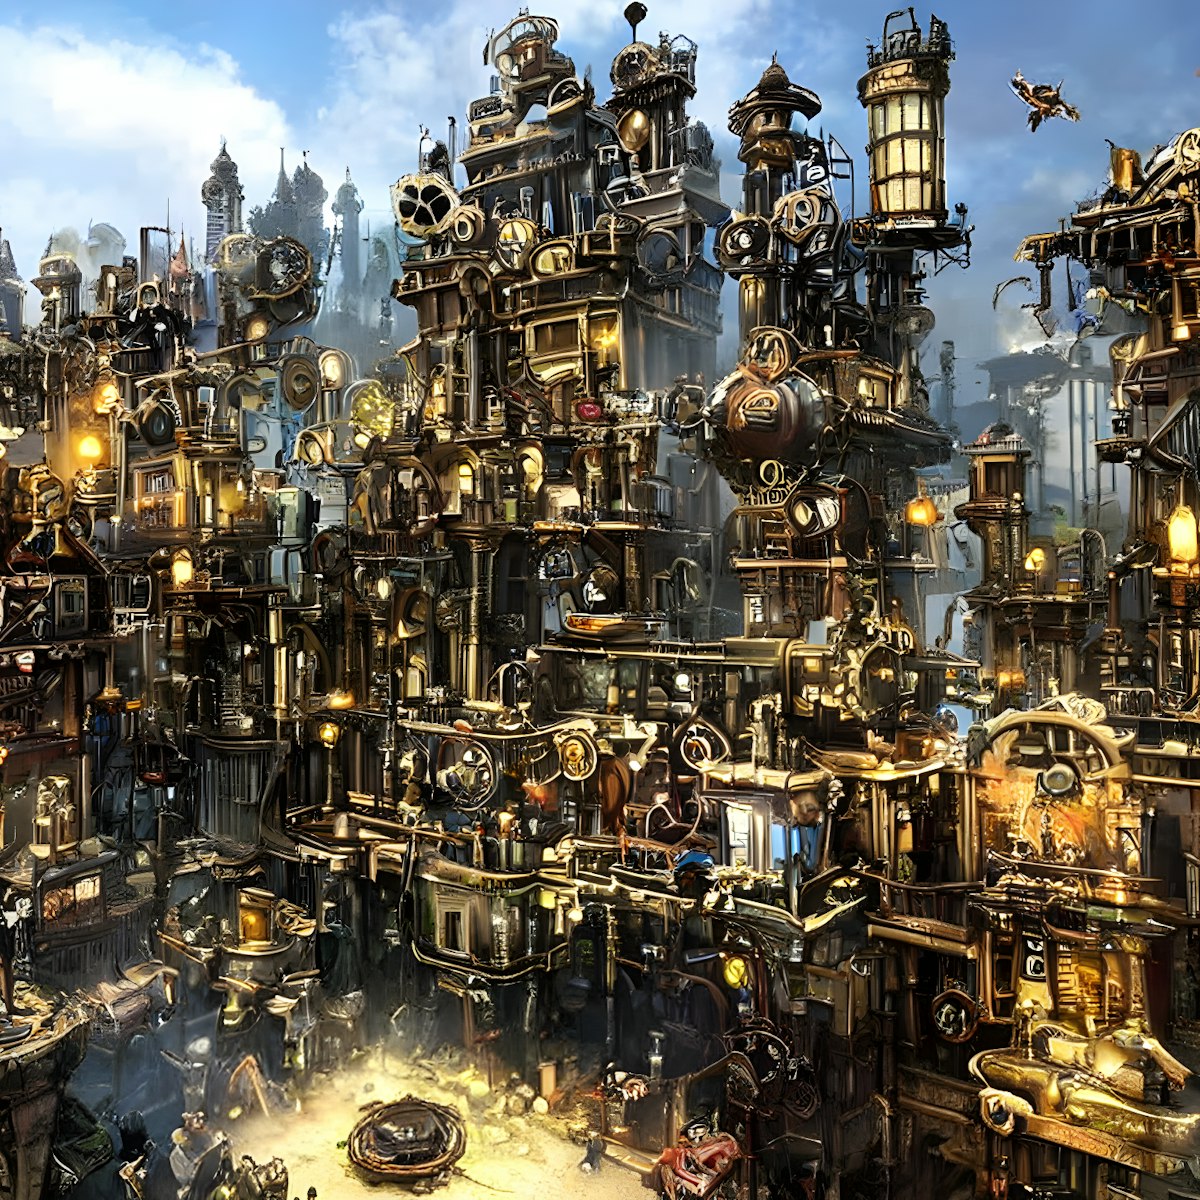 featured image - The History and Aesthetic of Steampunk: Could We Build a Steampunk World?